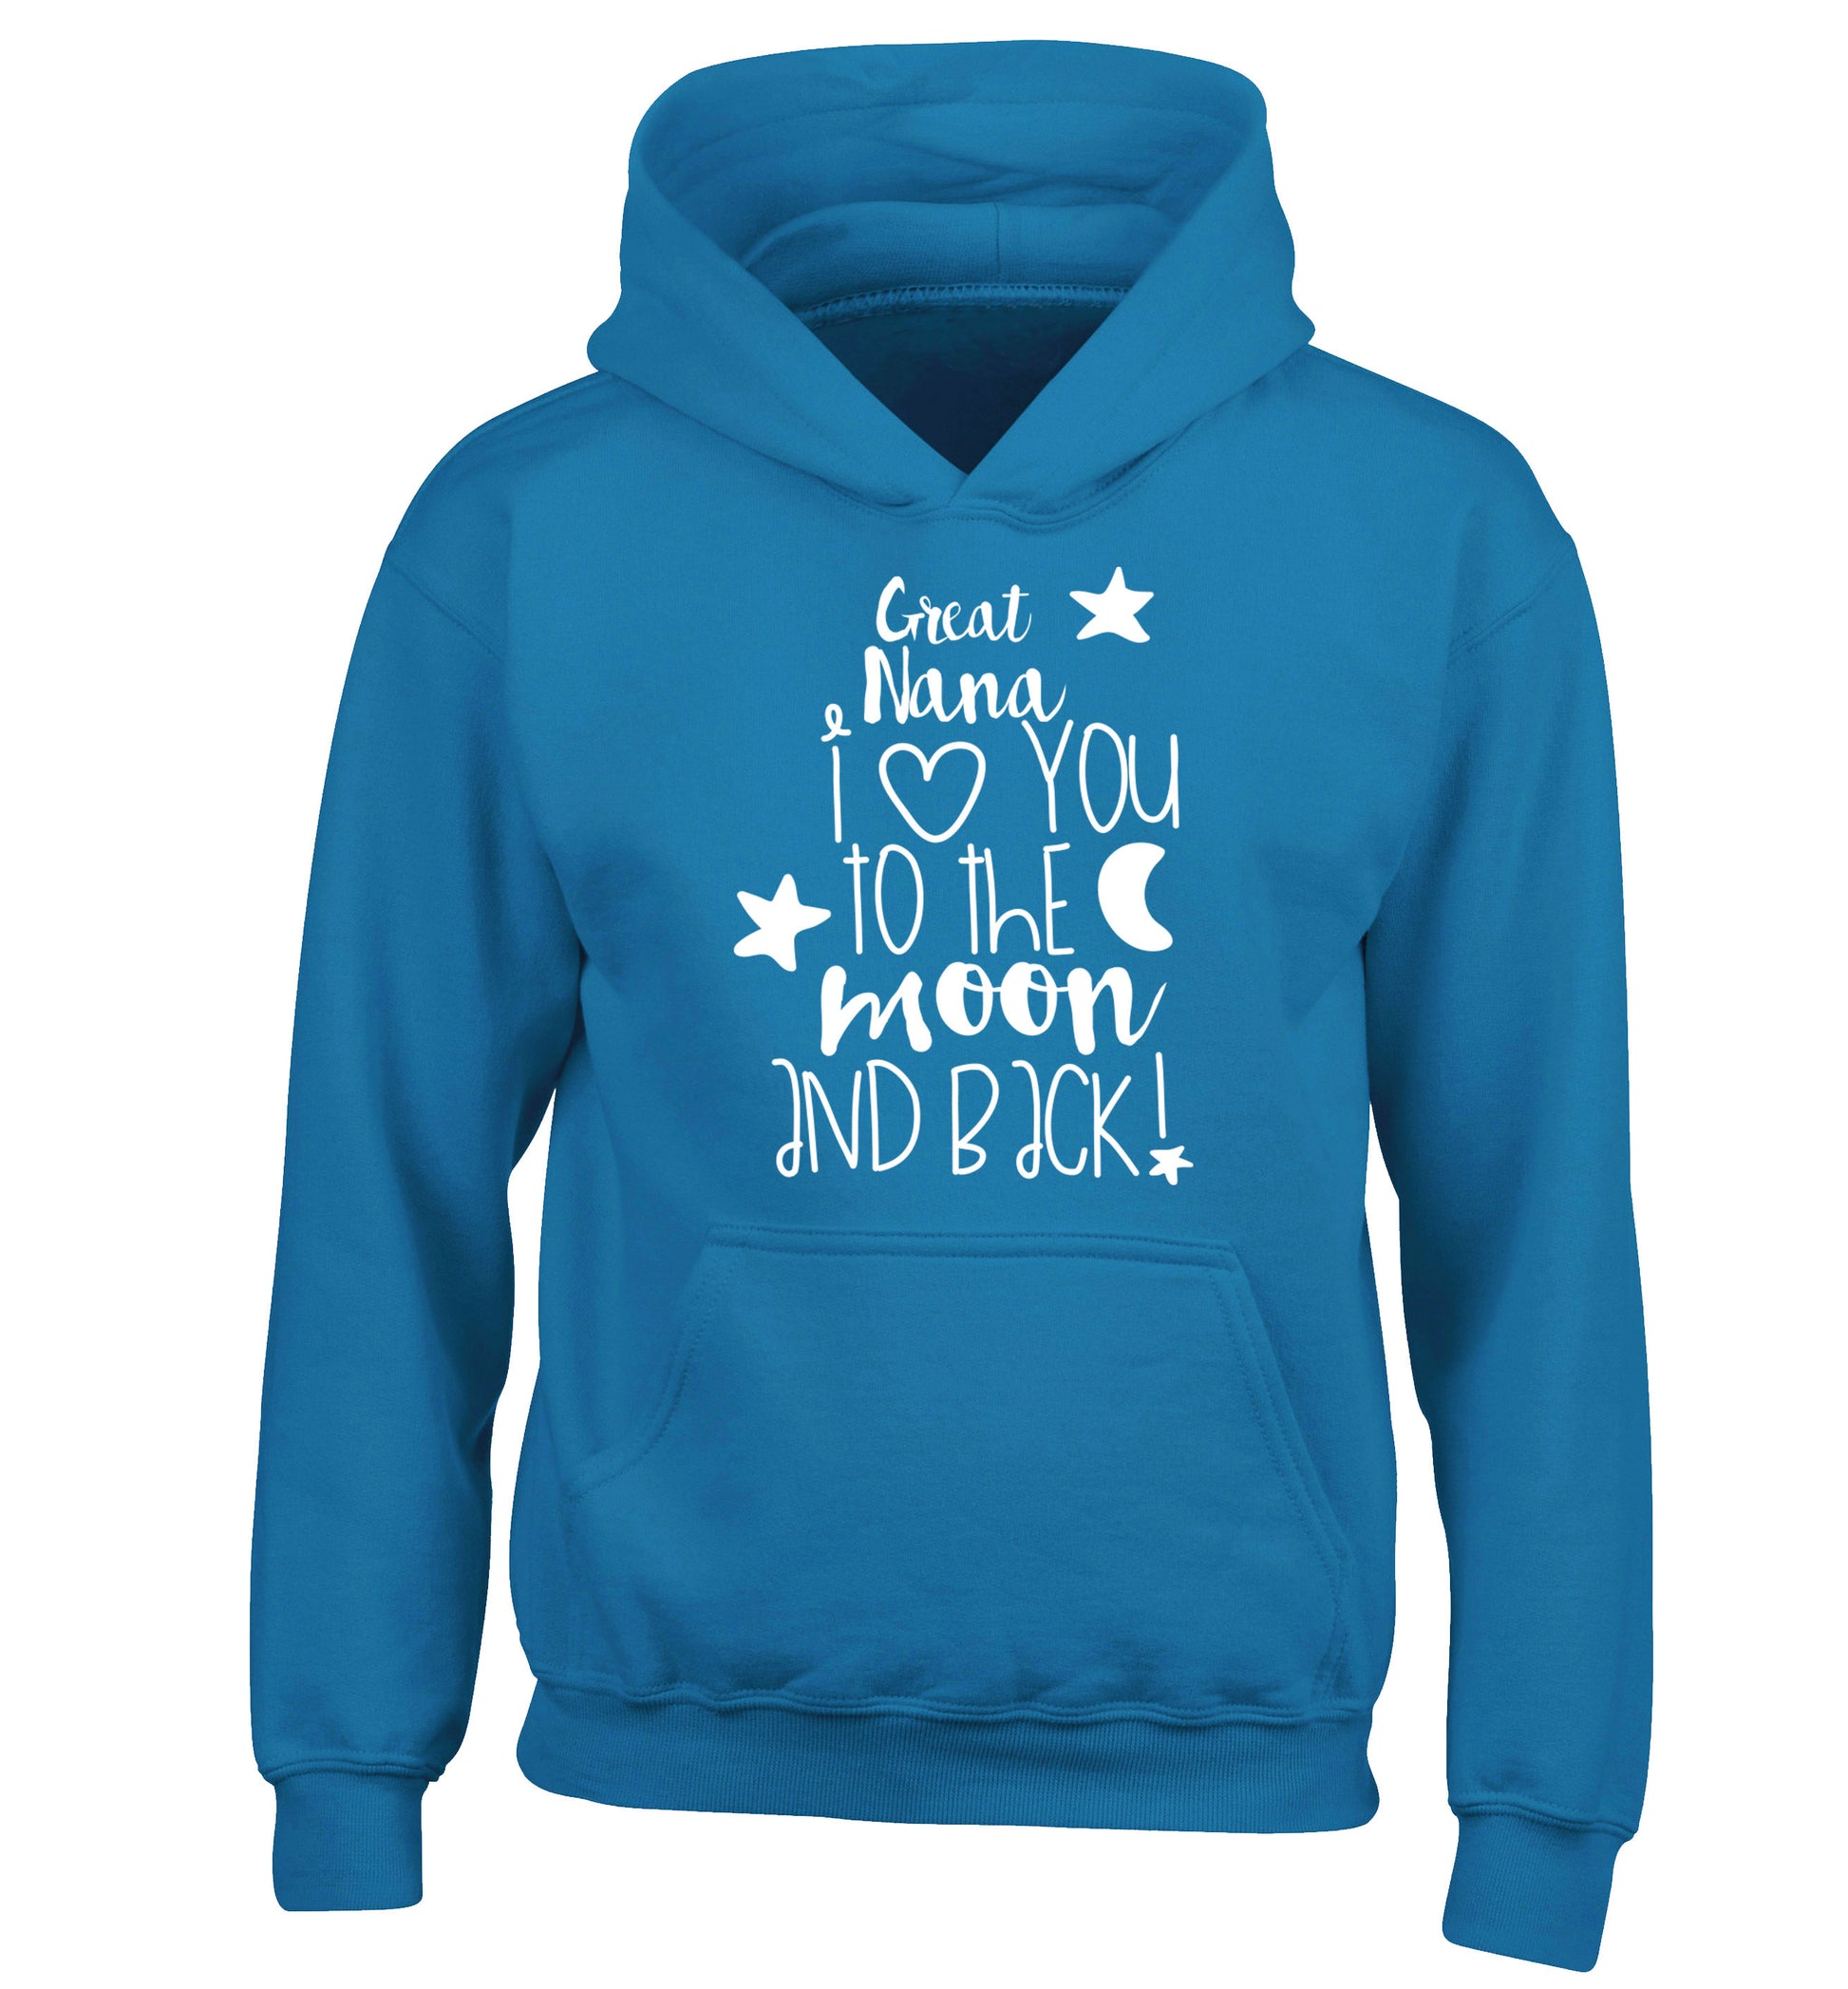 Great Nana I love you to the moon and back children's blue hoodie 12-14 Years